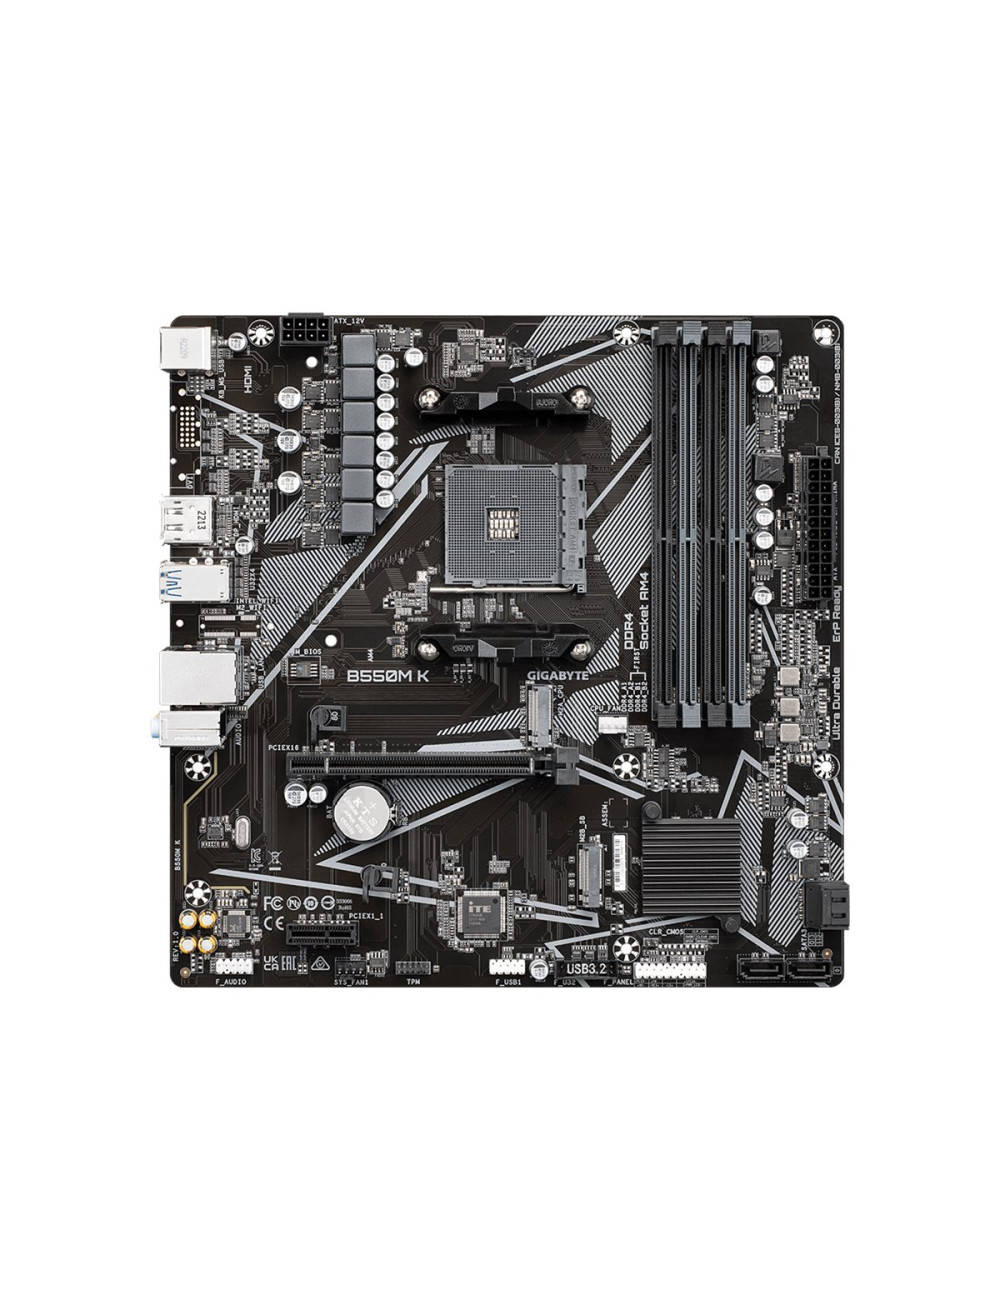 Gigabyte B550M K 1.0 M/B Processor family AMD Processor socket AM4 DDR4 DIMM Memory slots 4 Supported hard disk drive interfaces